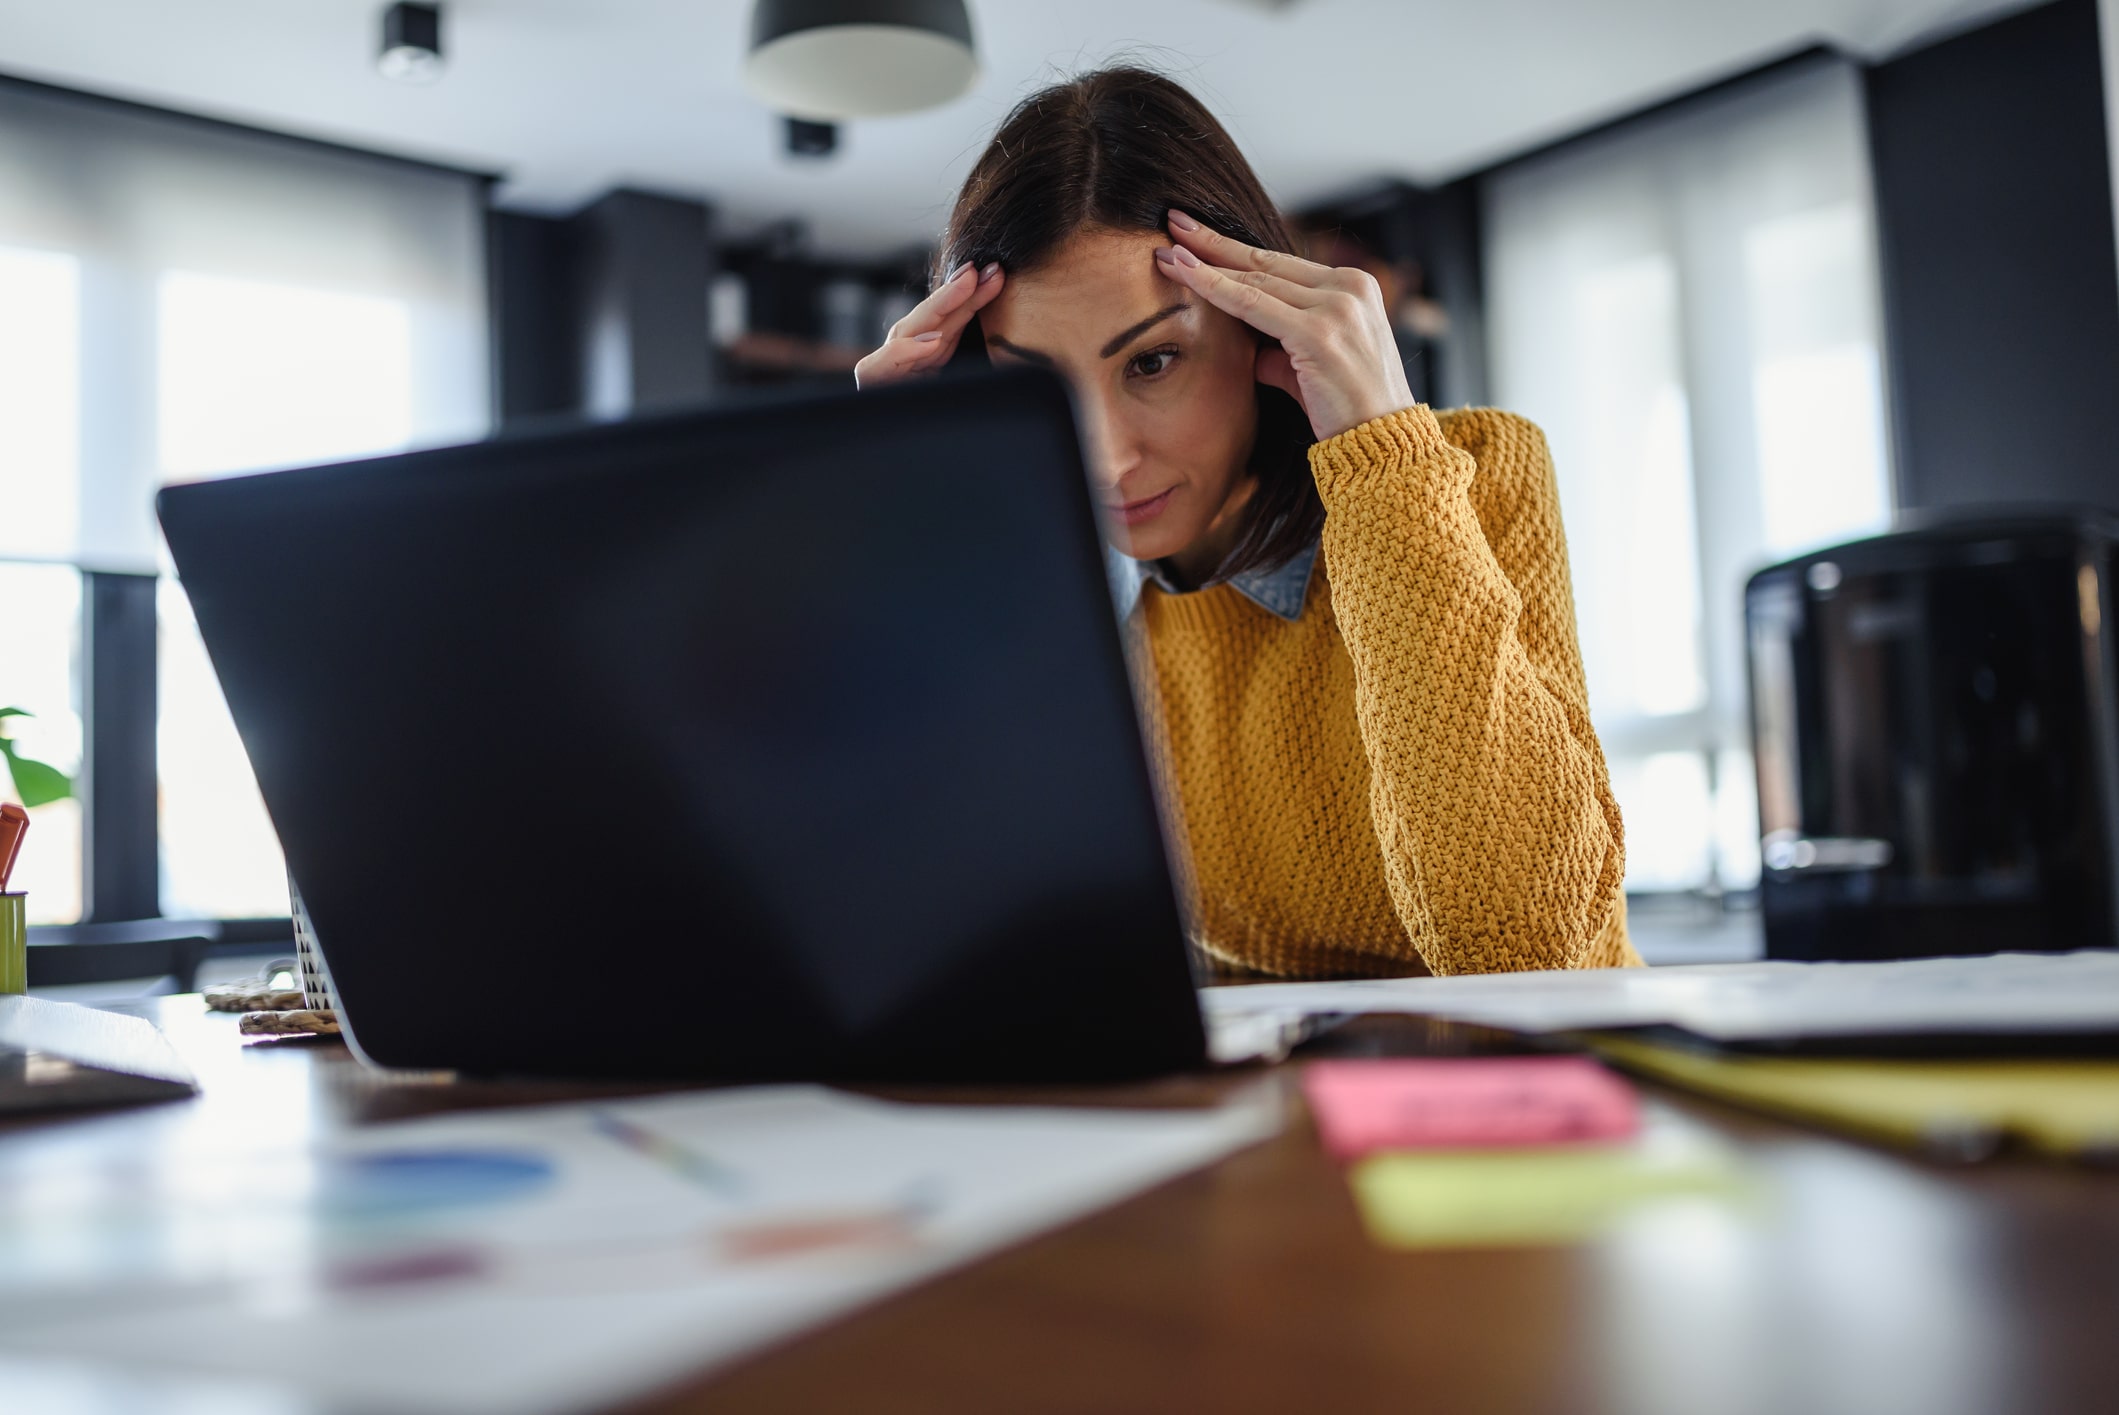 Brits feel stressed eight days a month, Ciphr study finds